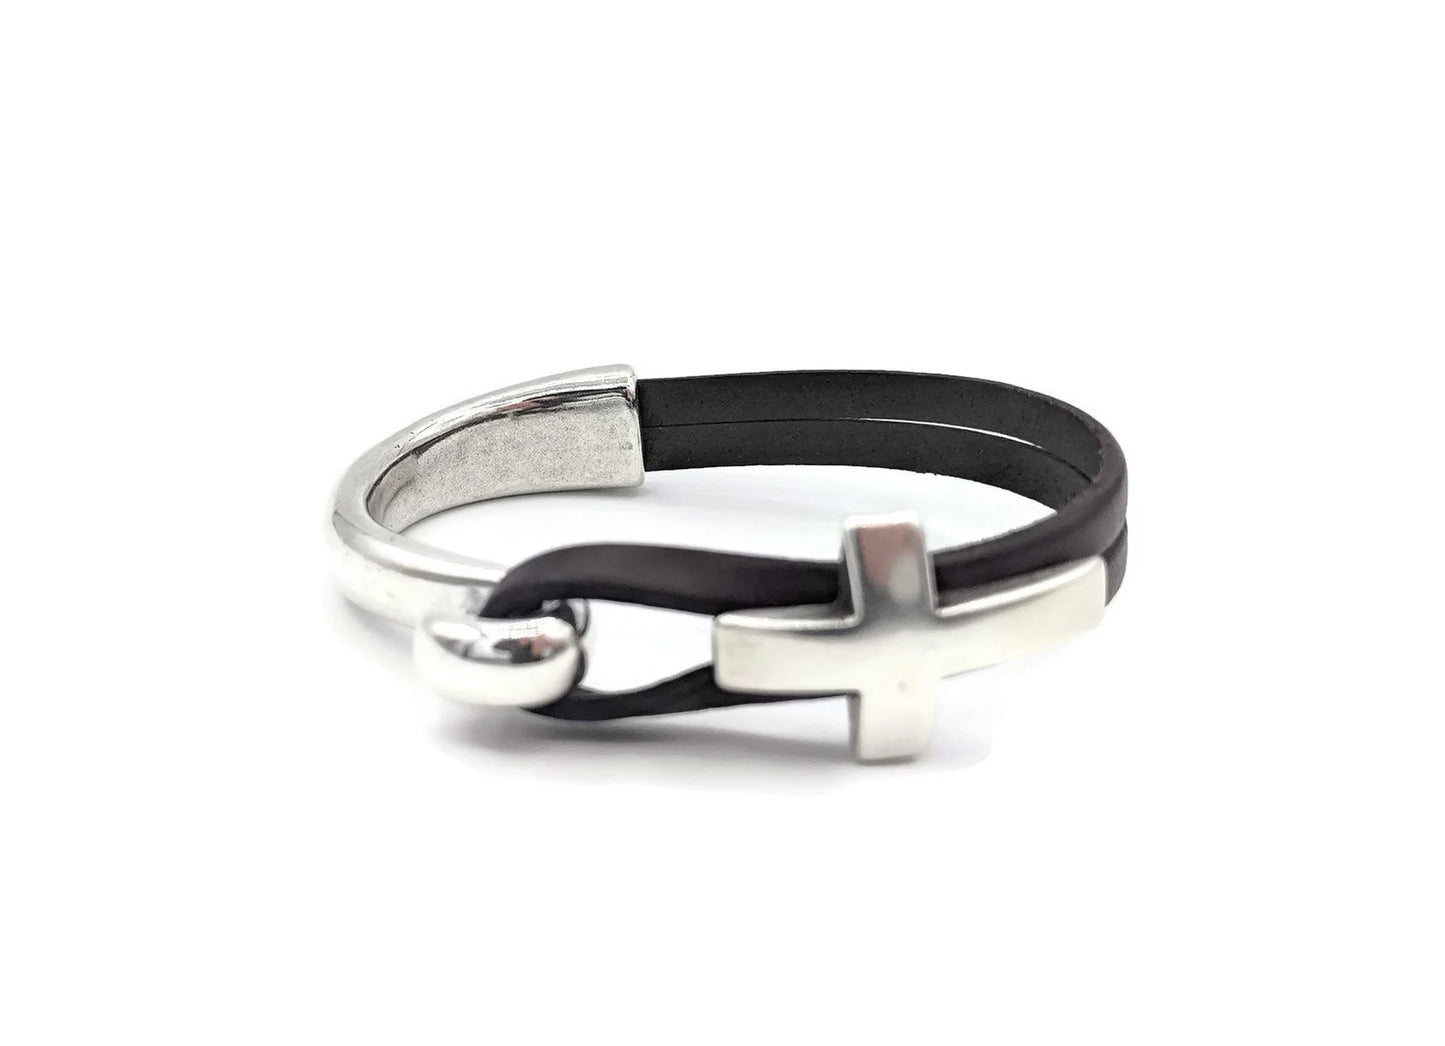 Silver Half Cuff Cross and Leather Bracelet